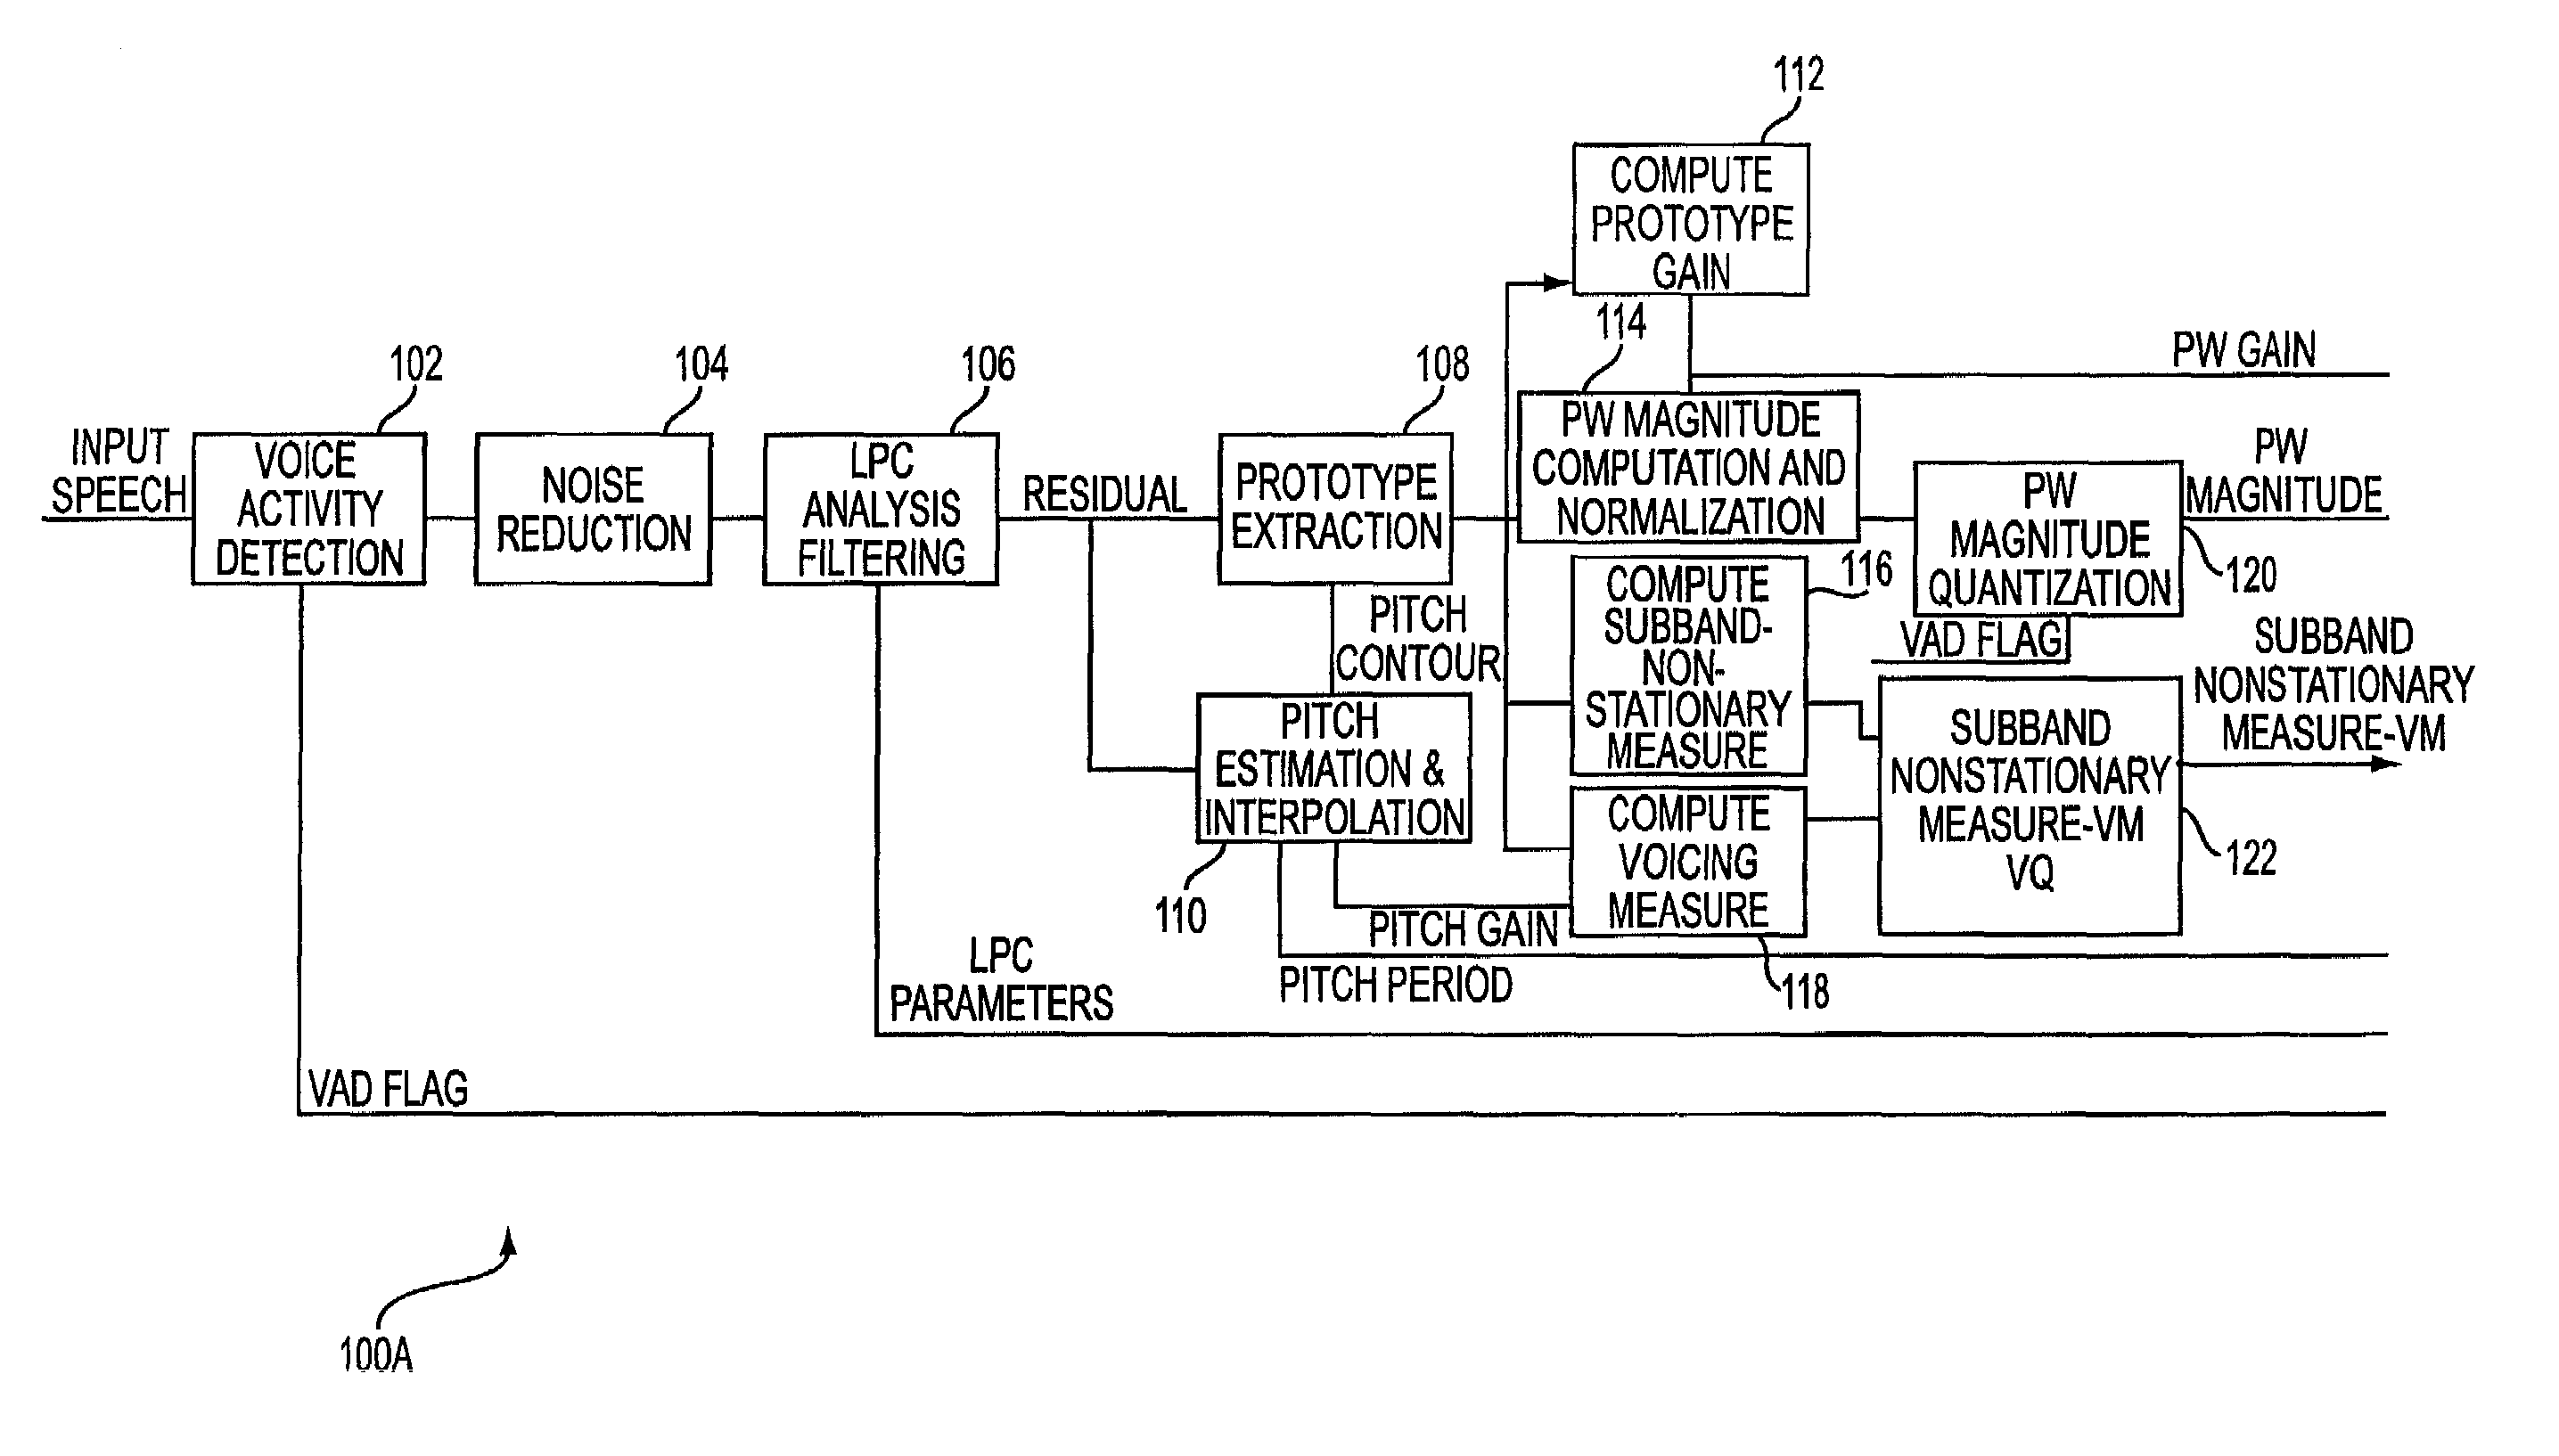 Voicing measure for a speech CODEC system